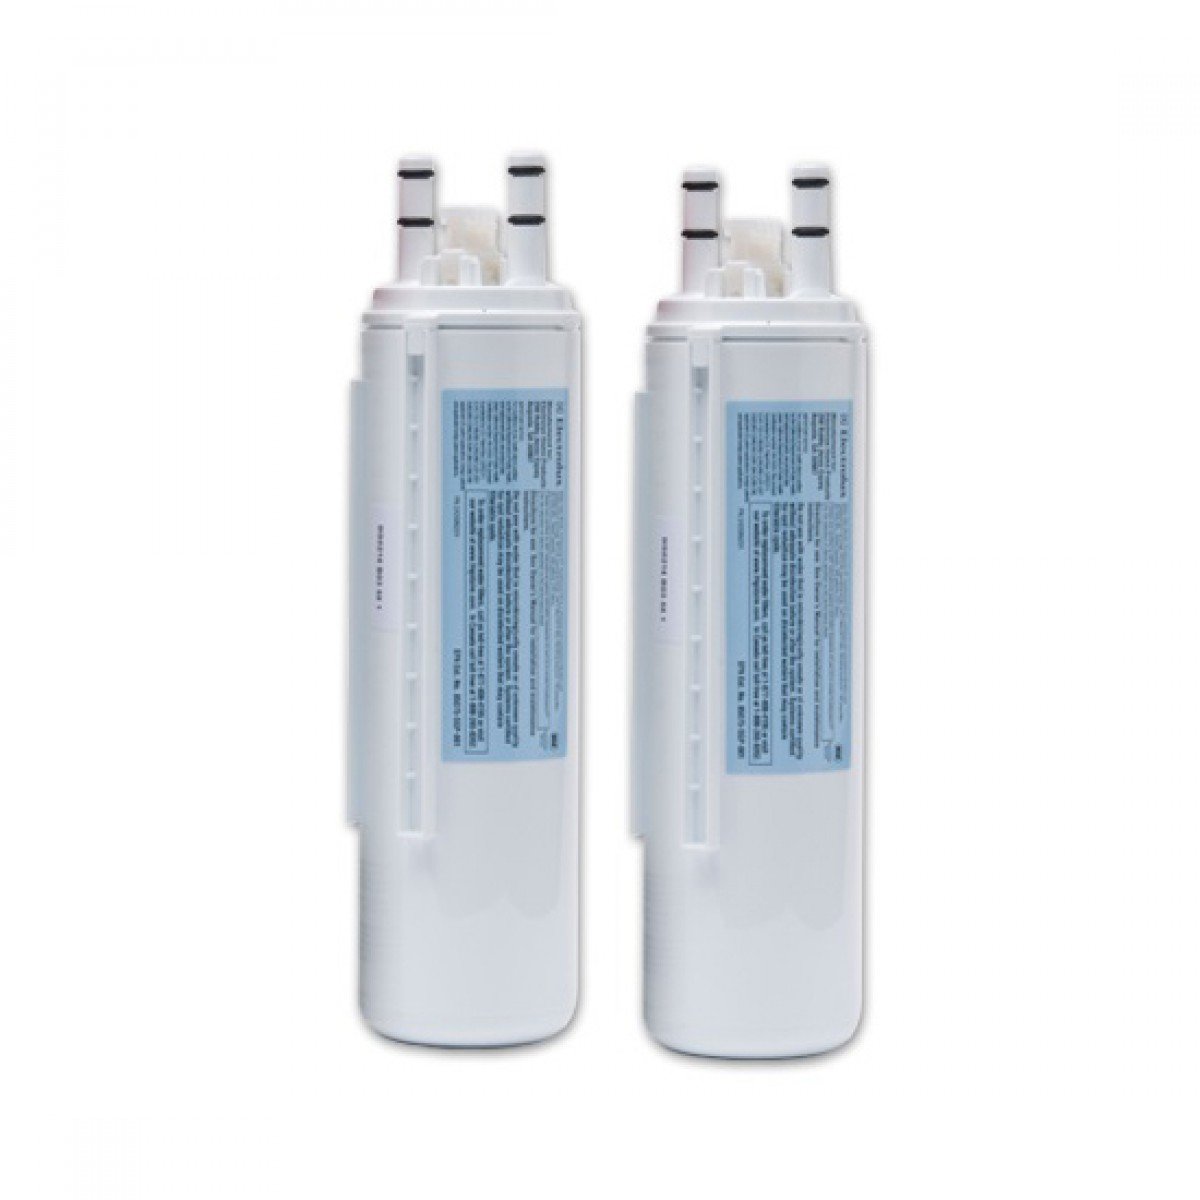 Electrolux 2 Pack Frigidaire PureSource3 Refirgerator Water Filter